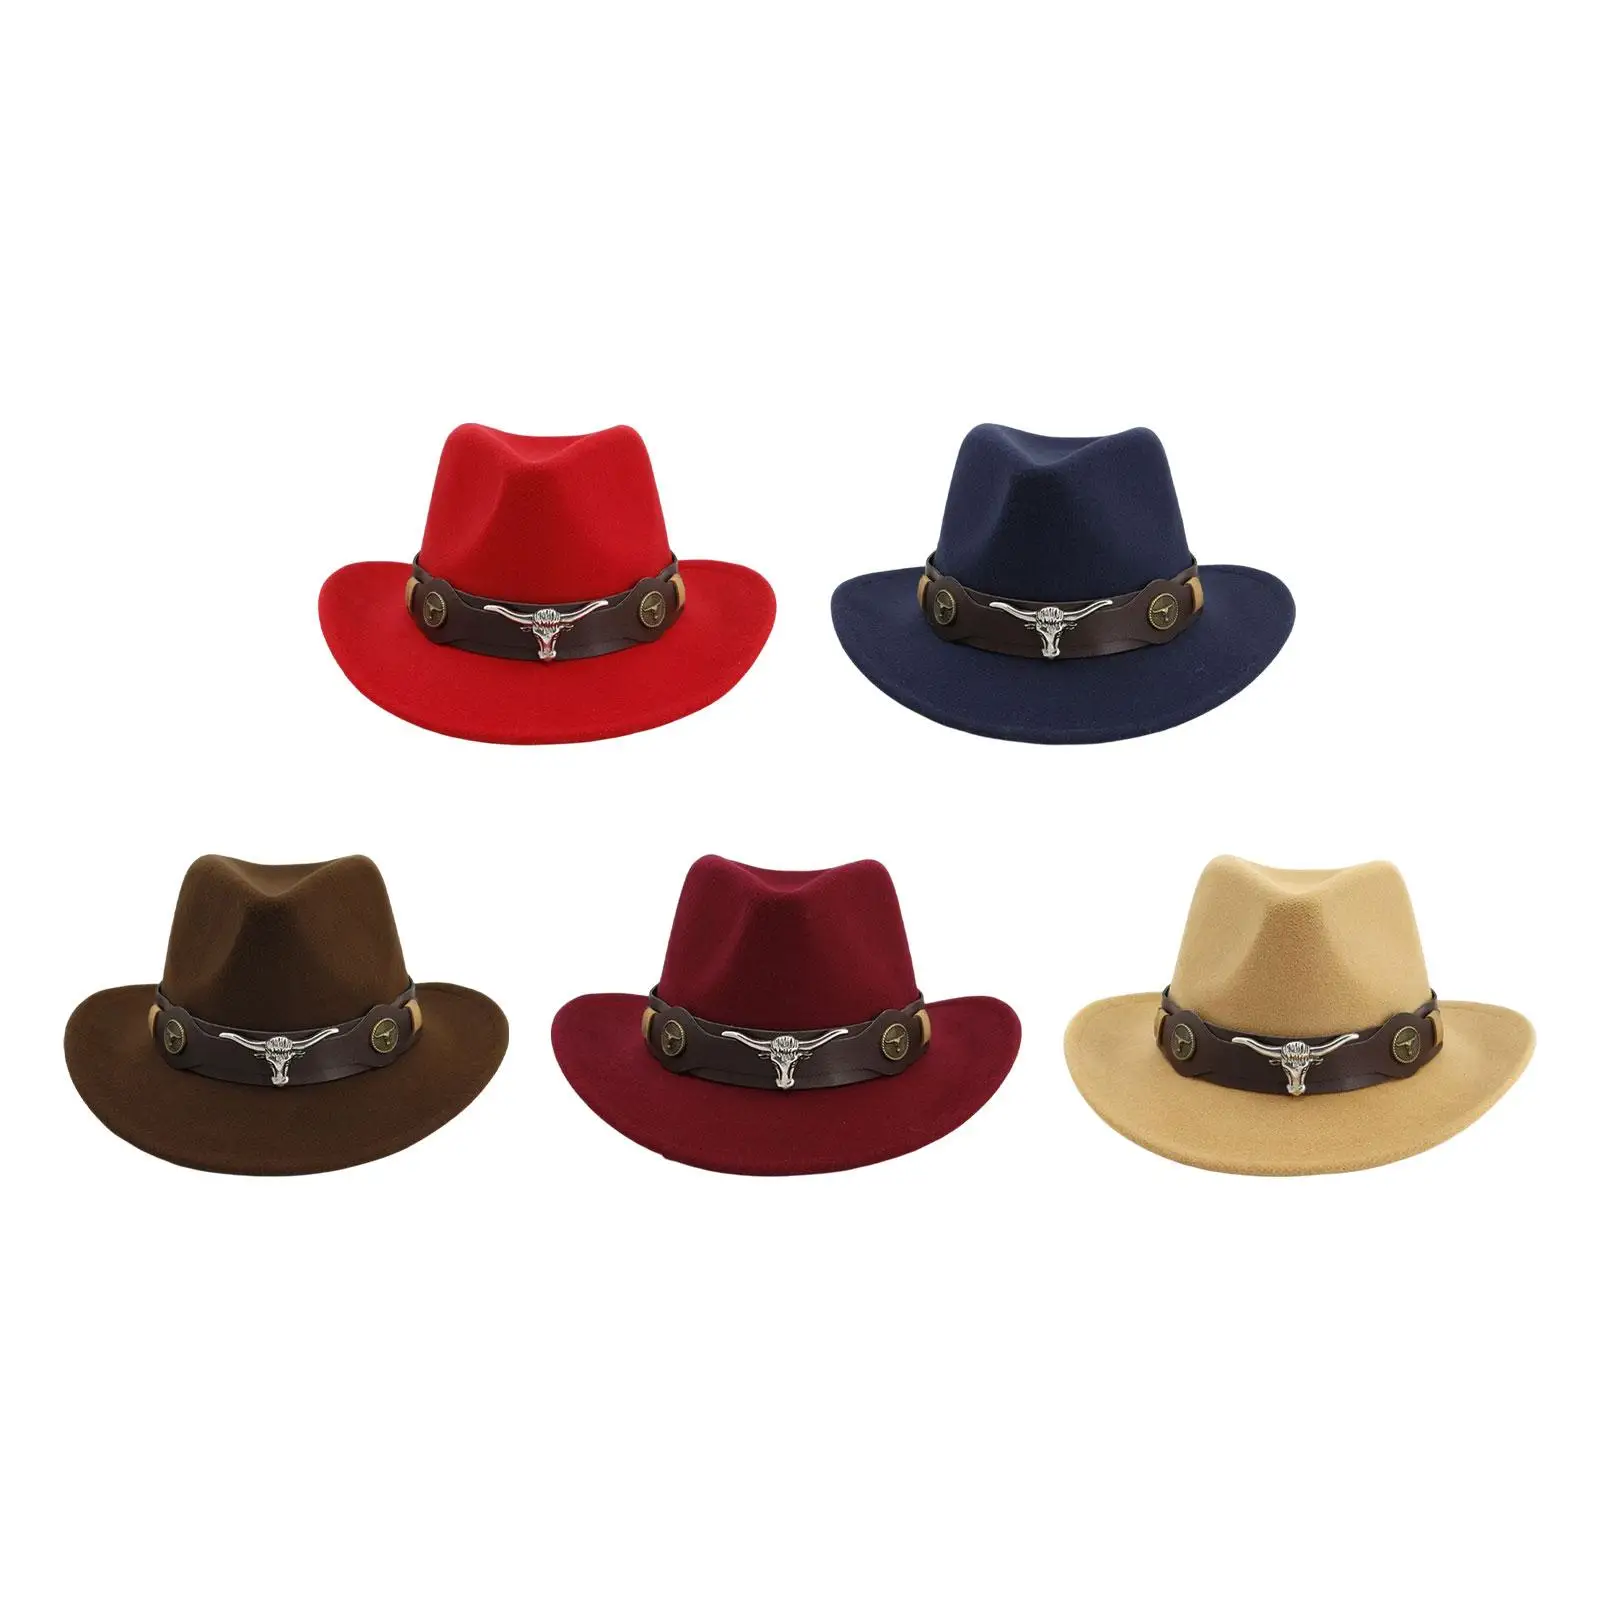 Classic Western Cowboy Hat, Photo Props Wide Brim Lightweight Cosplay Hat for Unisex Stage Performance Vocations Party